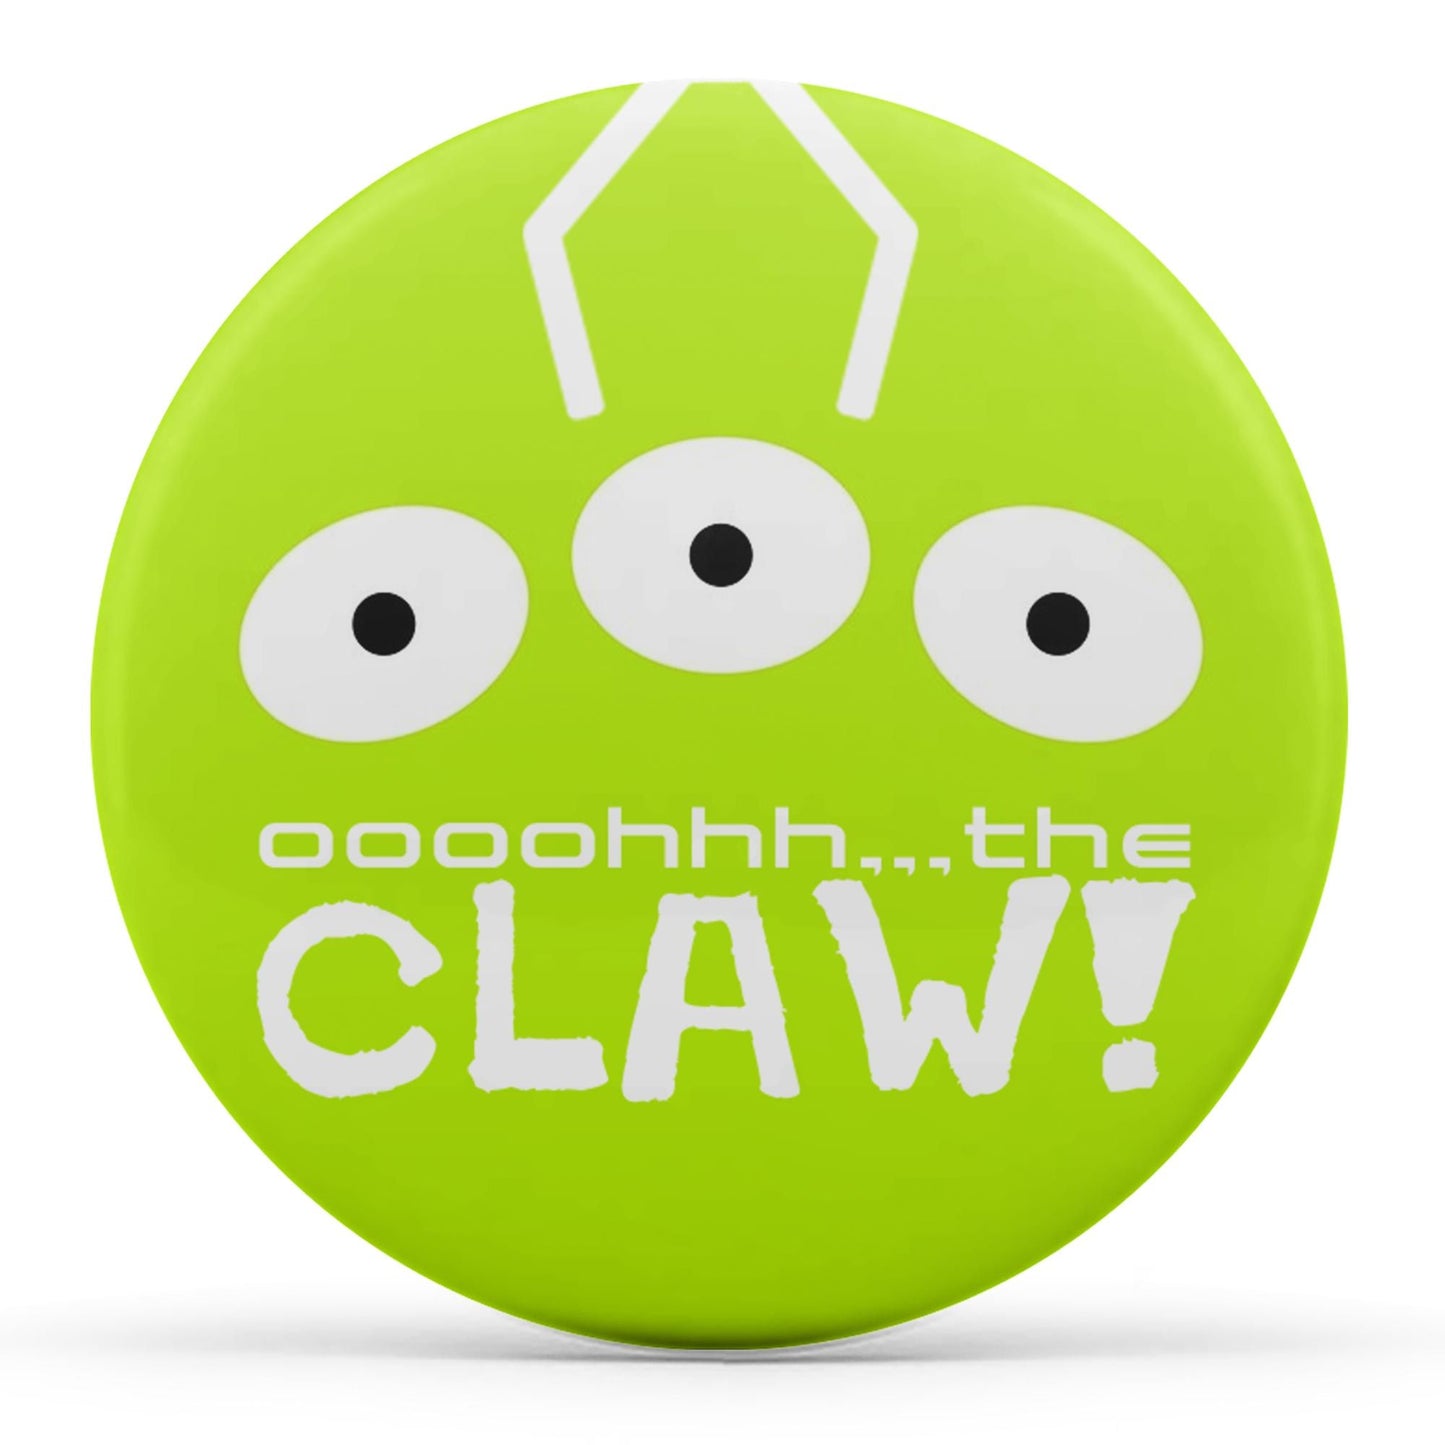 The Claw Image